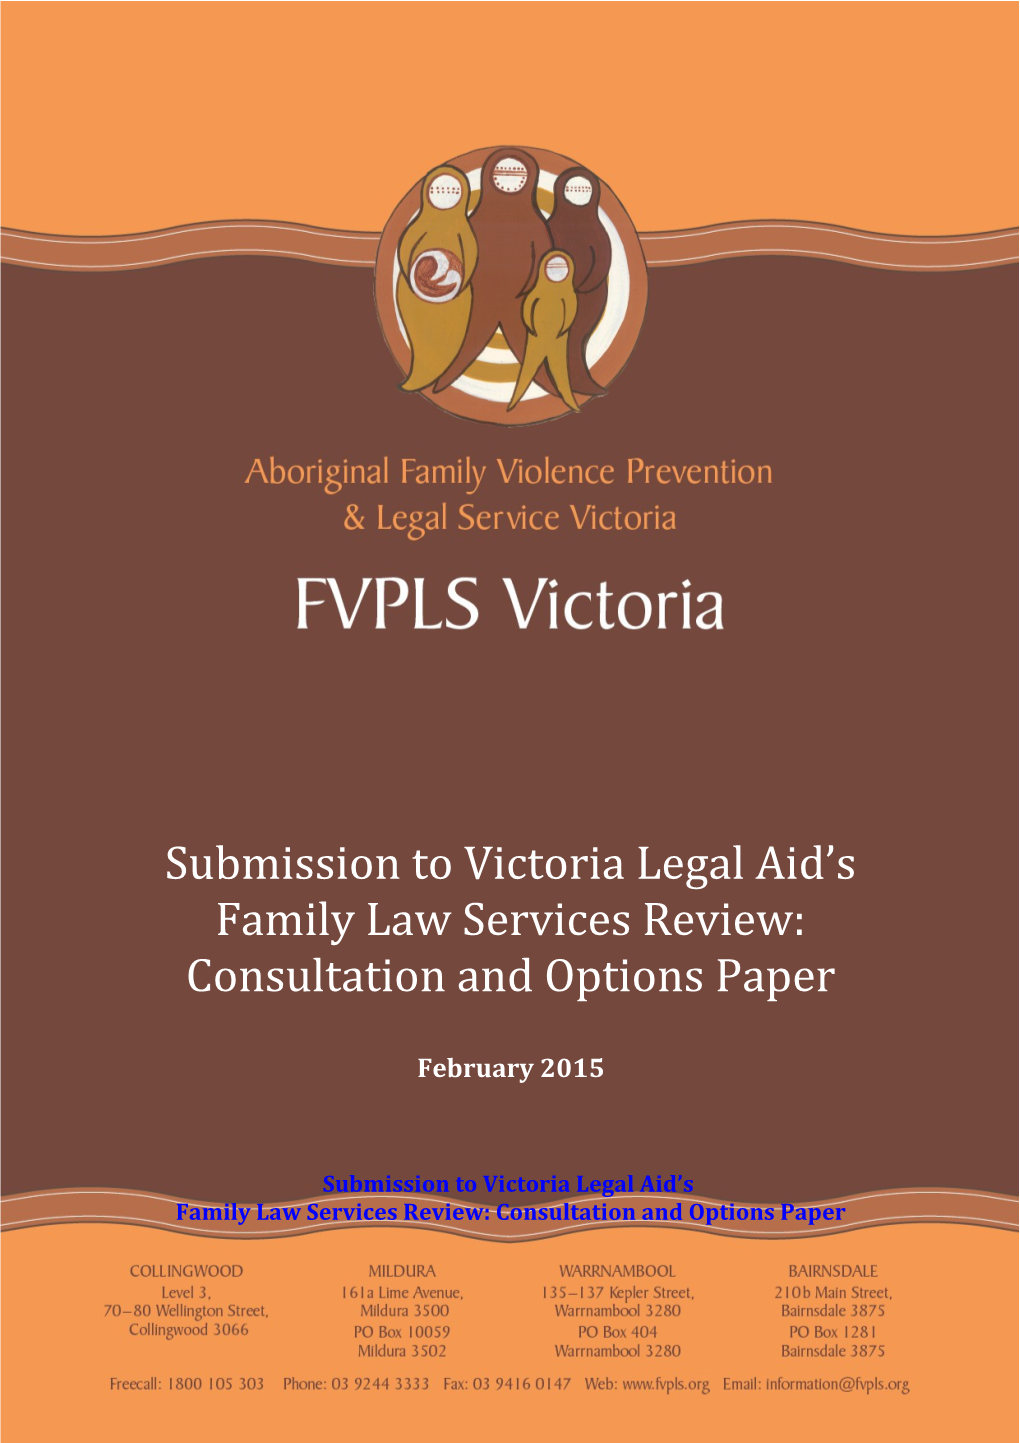 Aboriginal Family Violence Prevention & Legal Service Victoria Submission To VLA Family Services Review